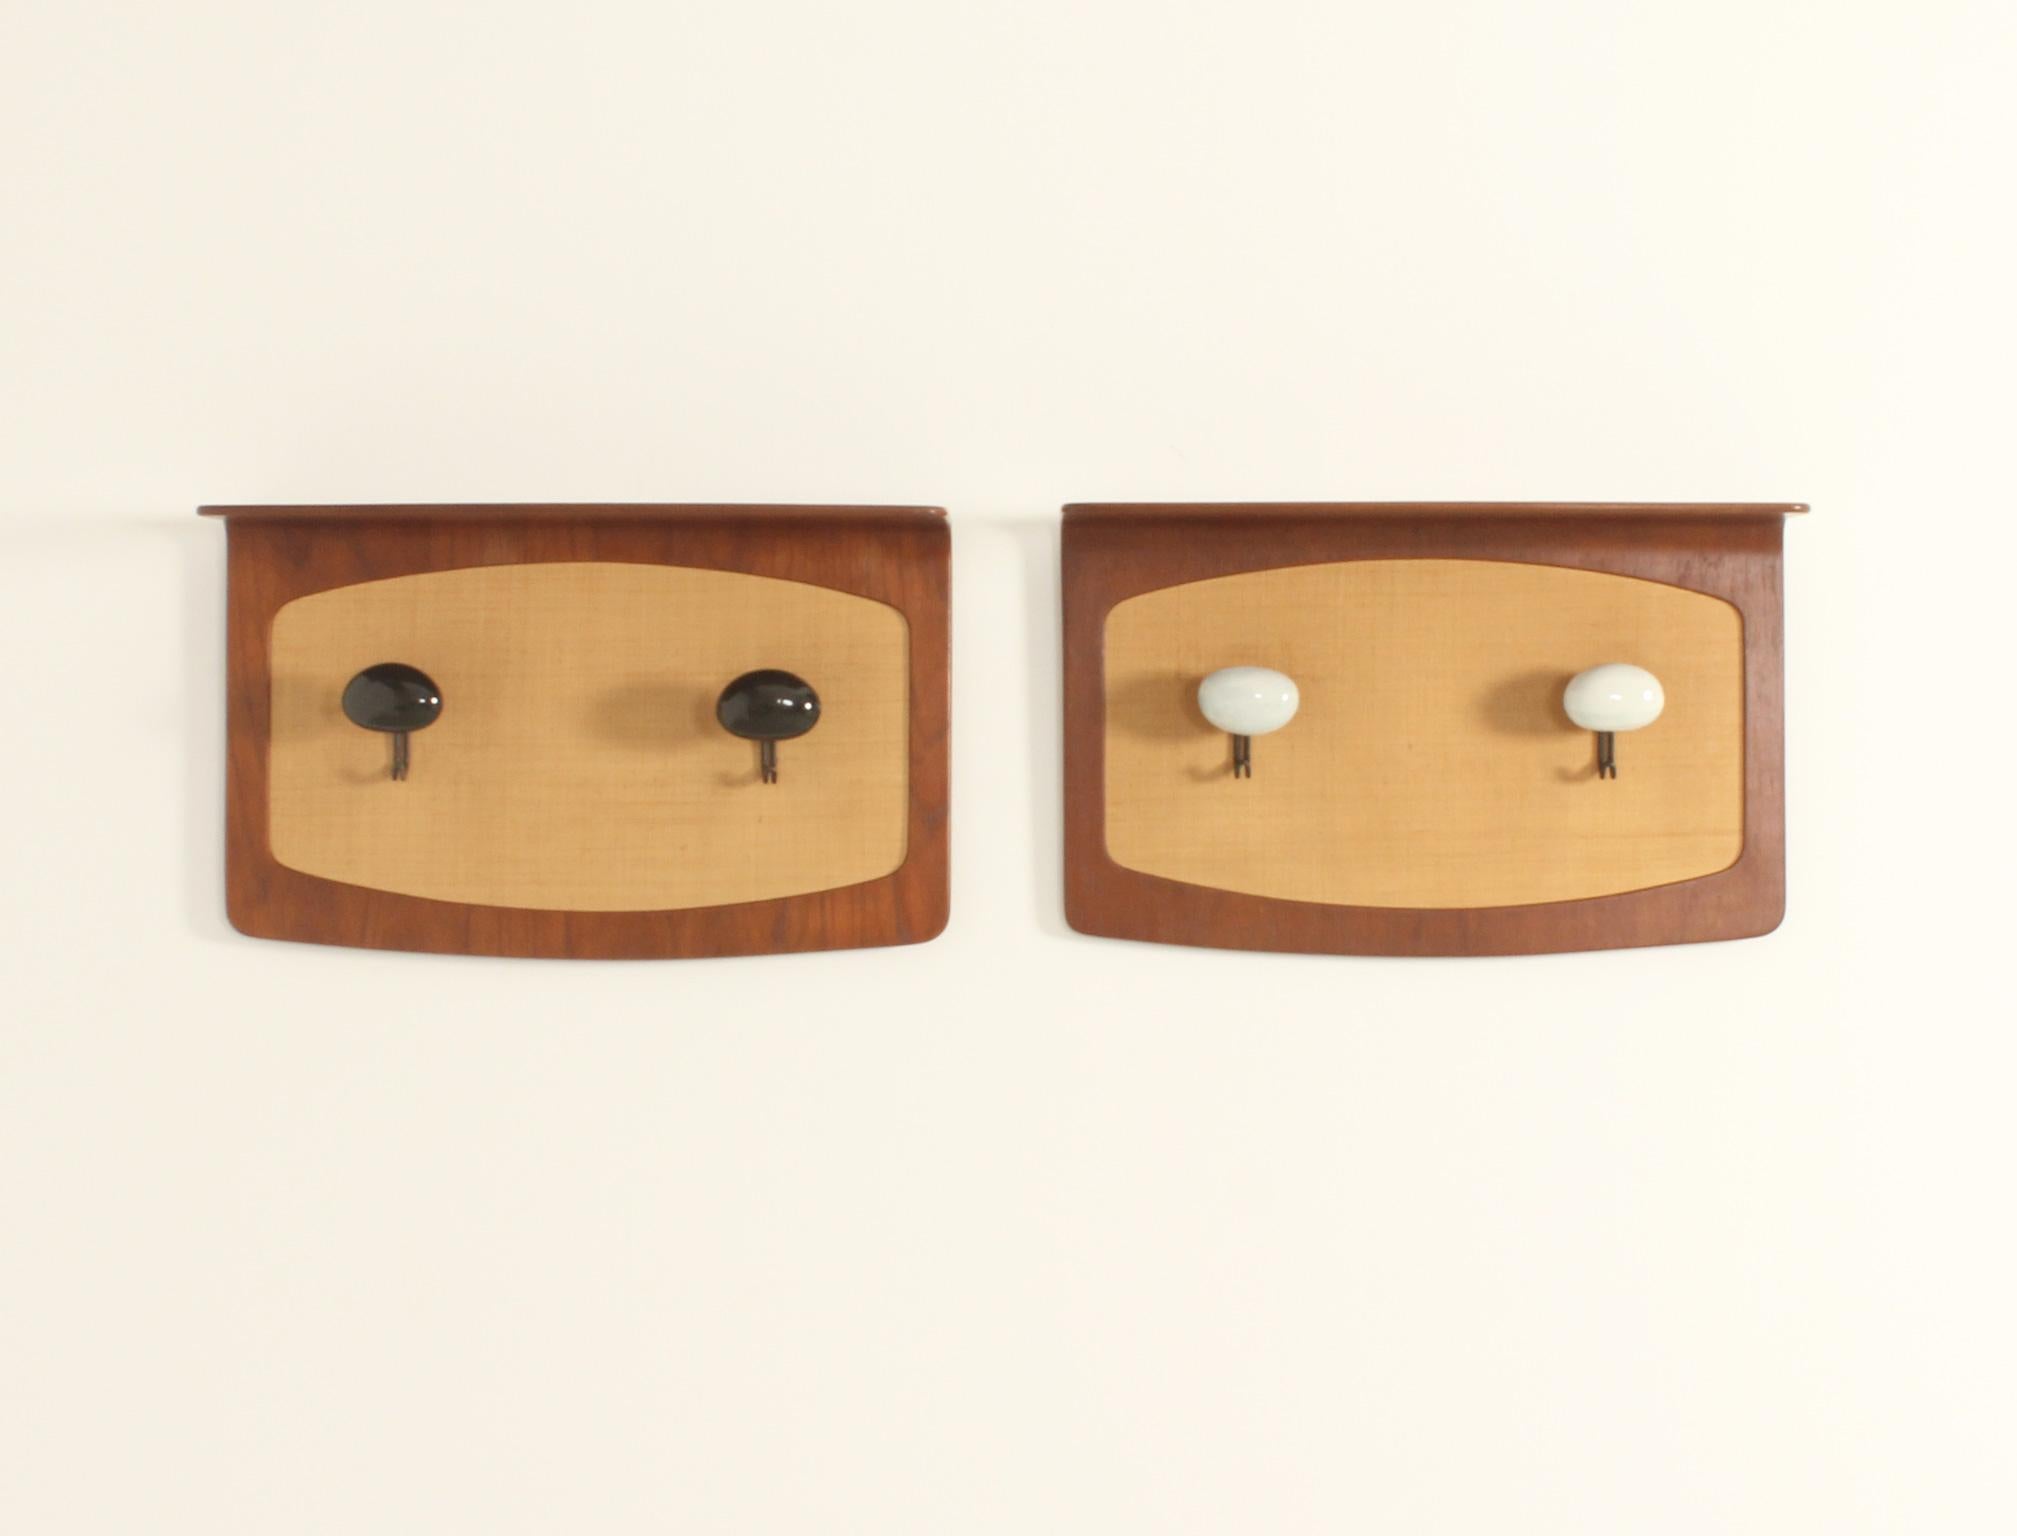 Pair of wall-mounted coat racks designed in 1950's by Franco Campo and Carlo Graffi for Home, Italy. Curved teak wood with seagrass front panels and two metal and ceramic coat hooks by the Italian ceramist Victor Cerrato. 